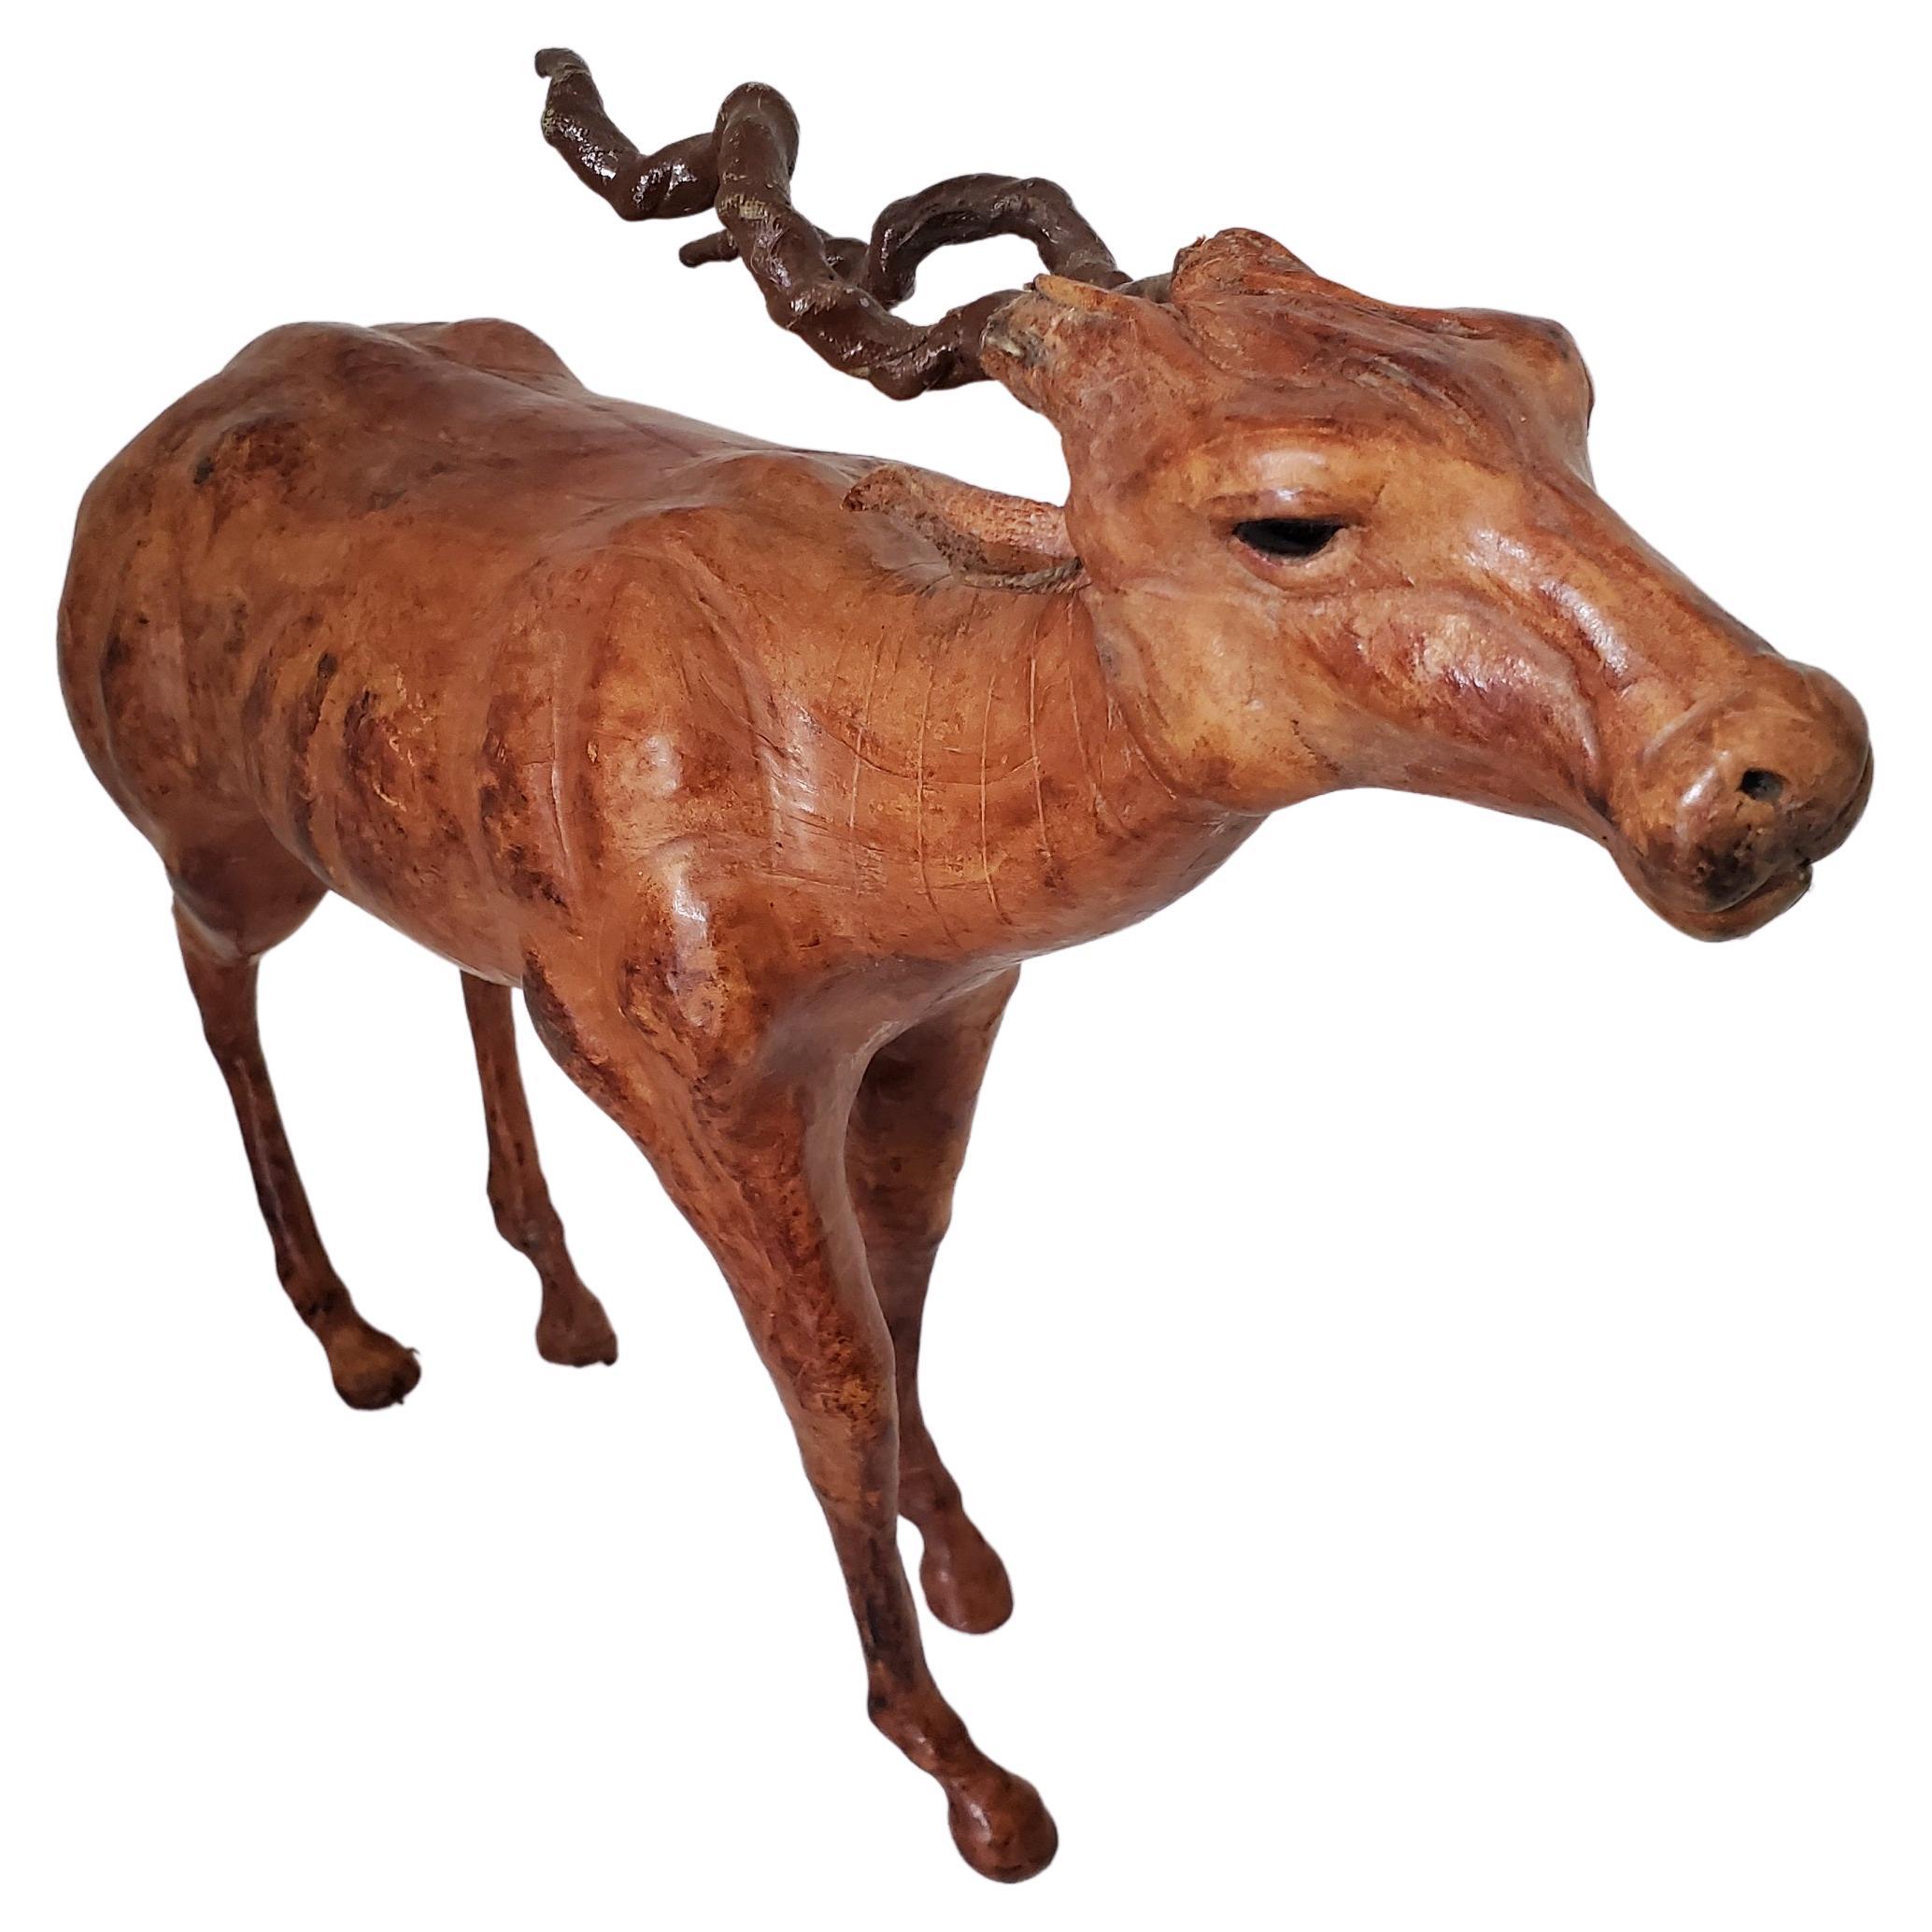 Vintage Sculpture - Wood and Leather Gazelle Likely from Liberty's London